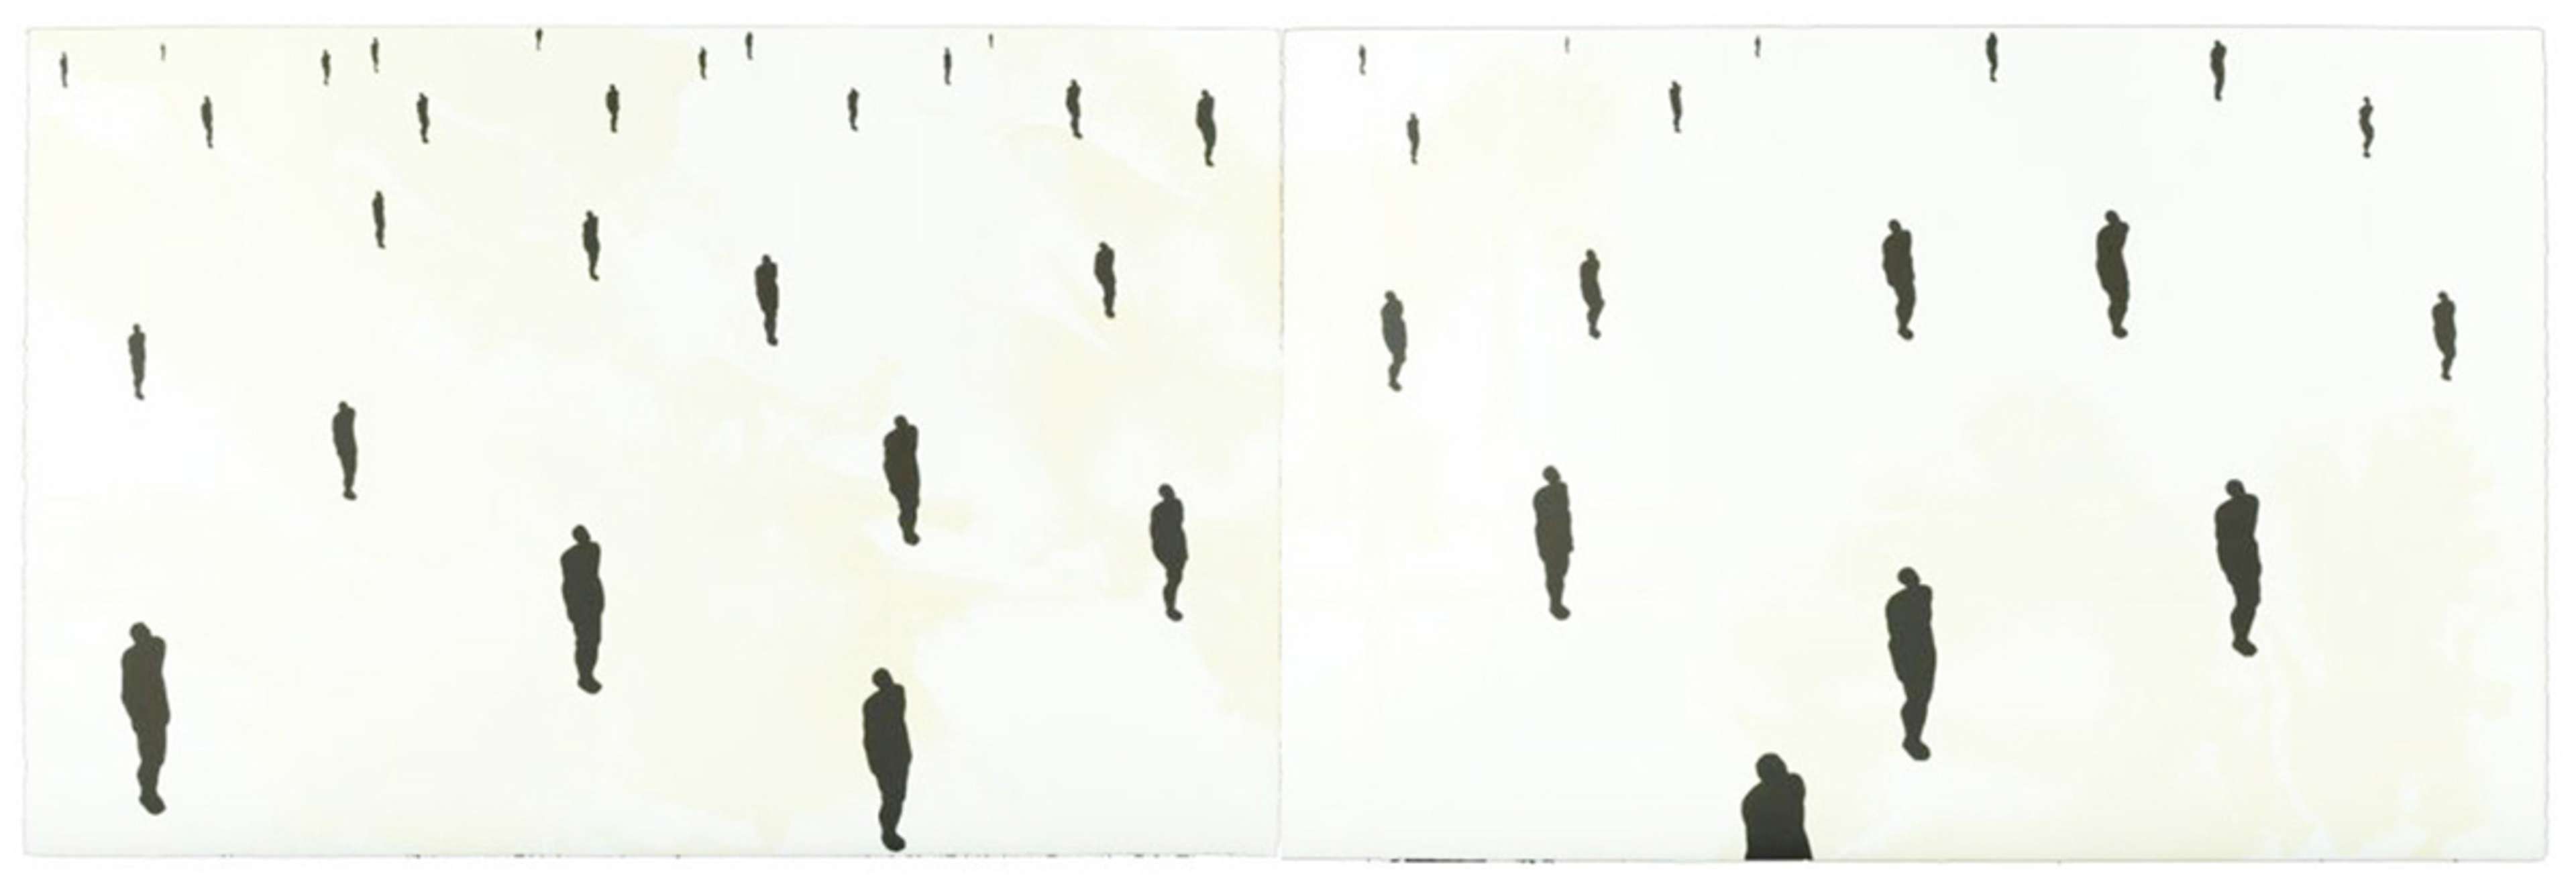 An image of the print History by Antony Gormley: a group of human silhouettes, spaced out, drawn in black against a white background.